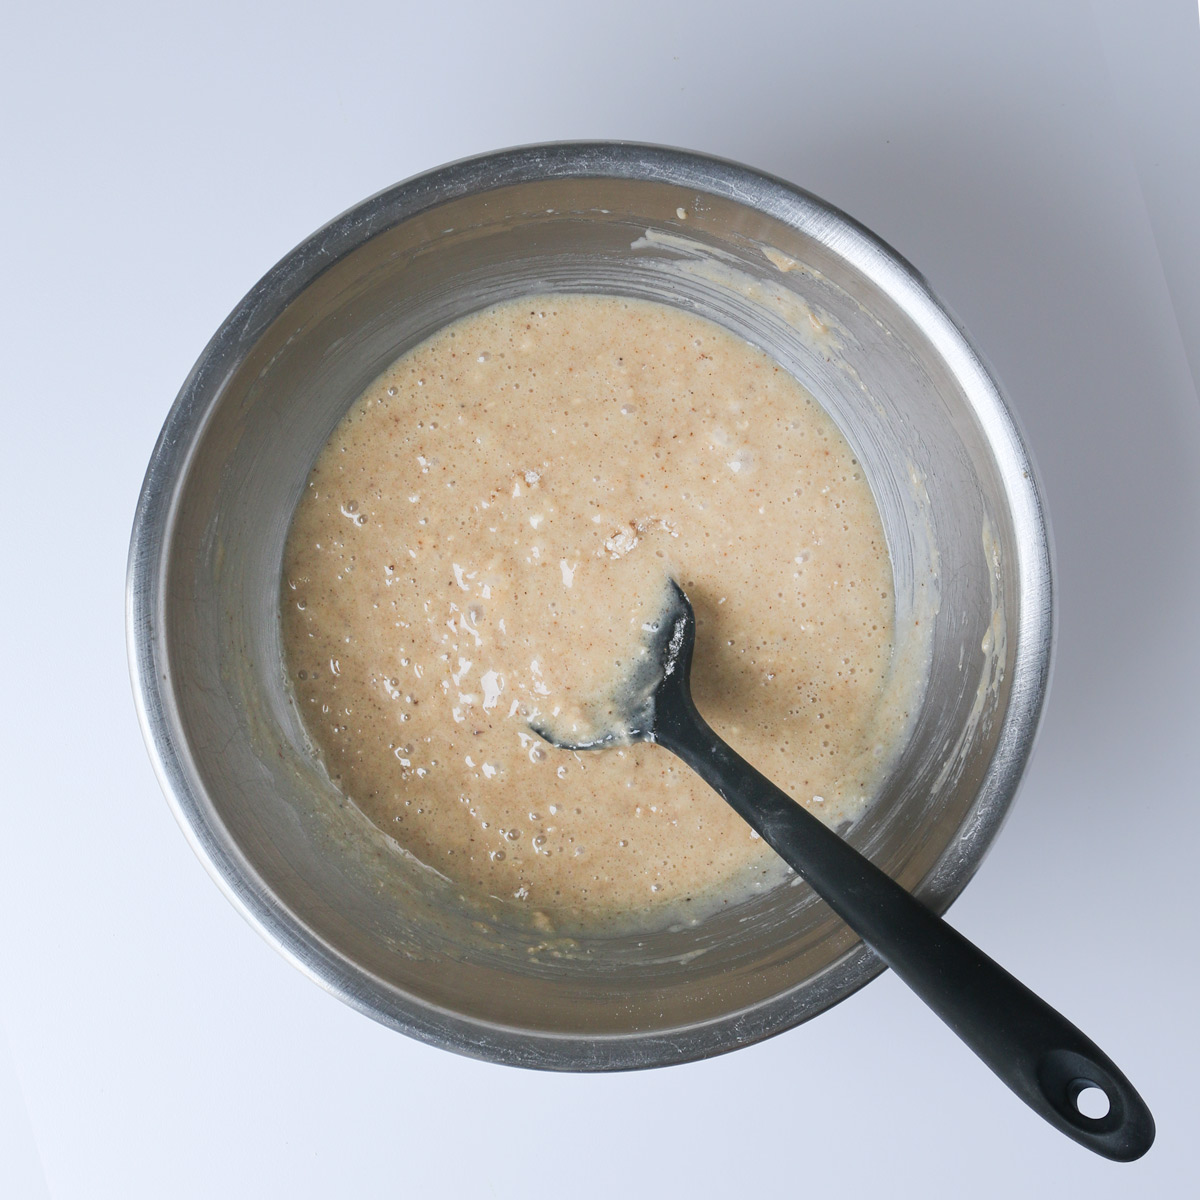 the coffee cake batter prepared in a mixing bowl with a black rubber spatula.